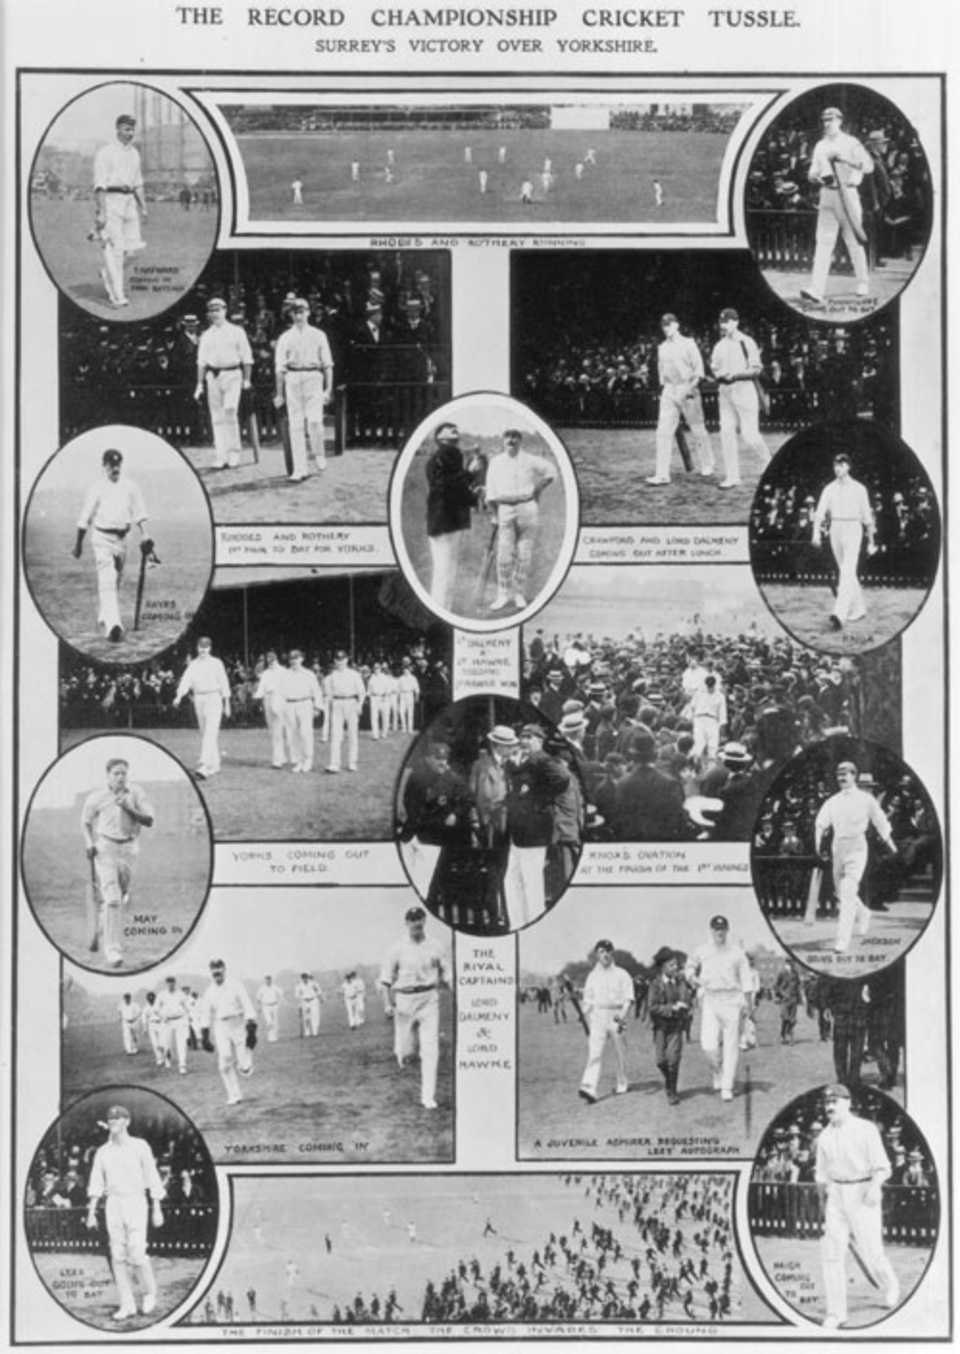 Action during Surrey's victory over Yorkshire, County Championships, July 28, 1906